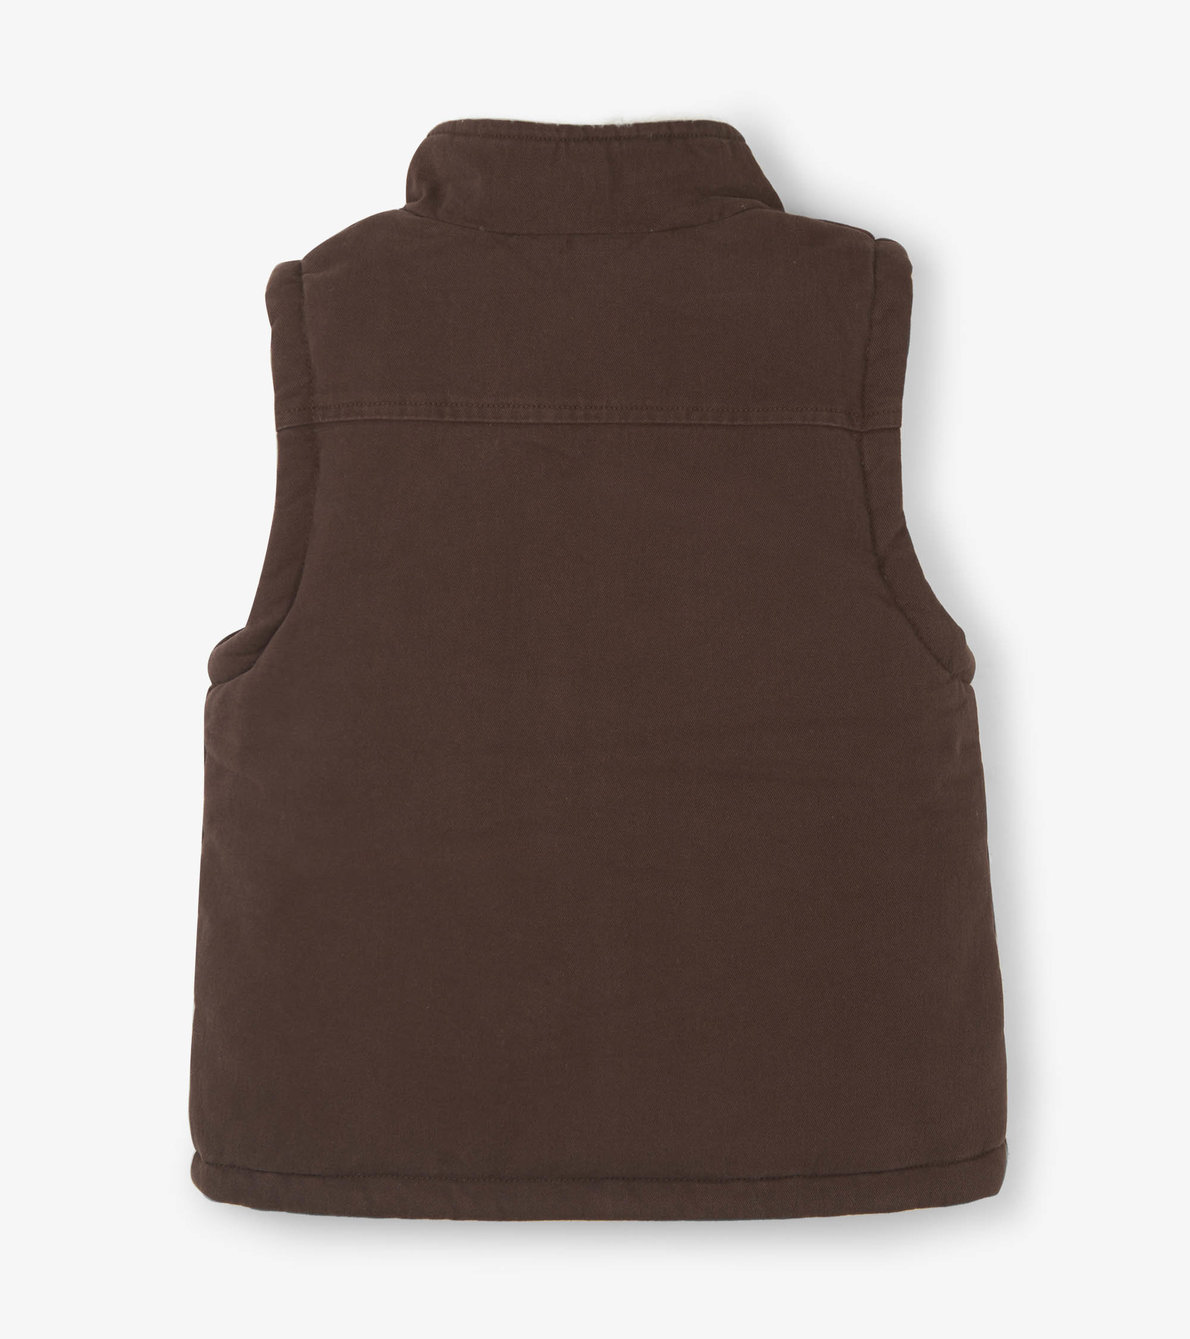 View larger image of Caramel Sherpa Lined Vest